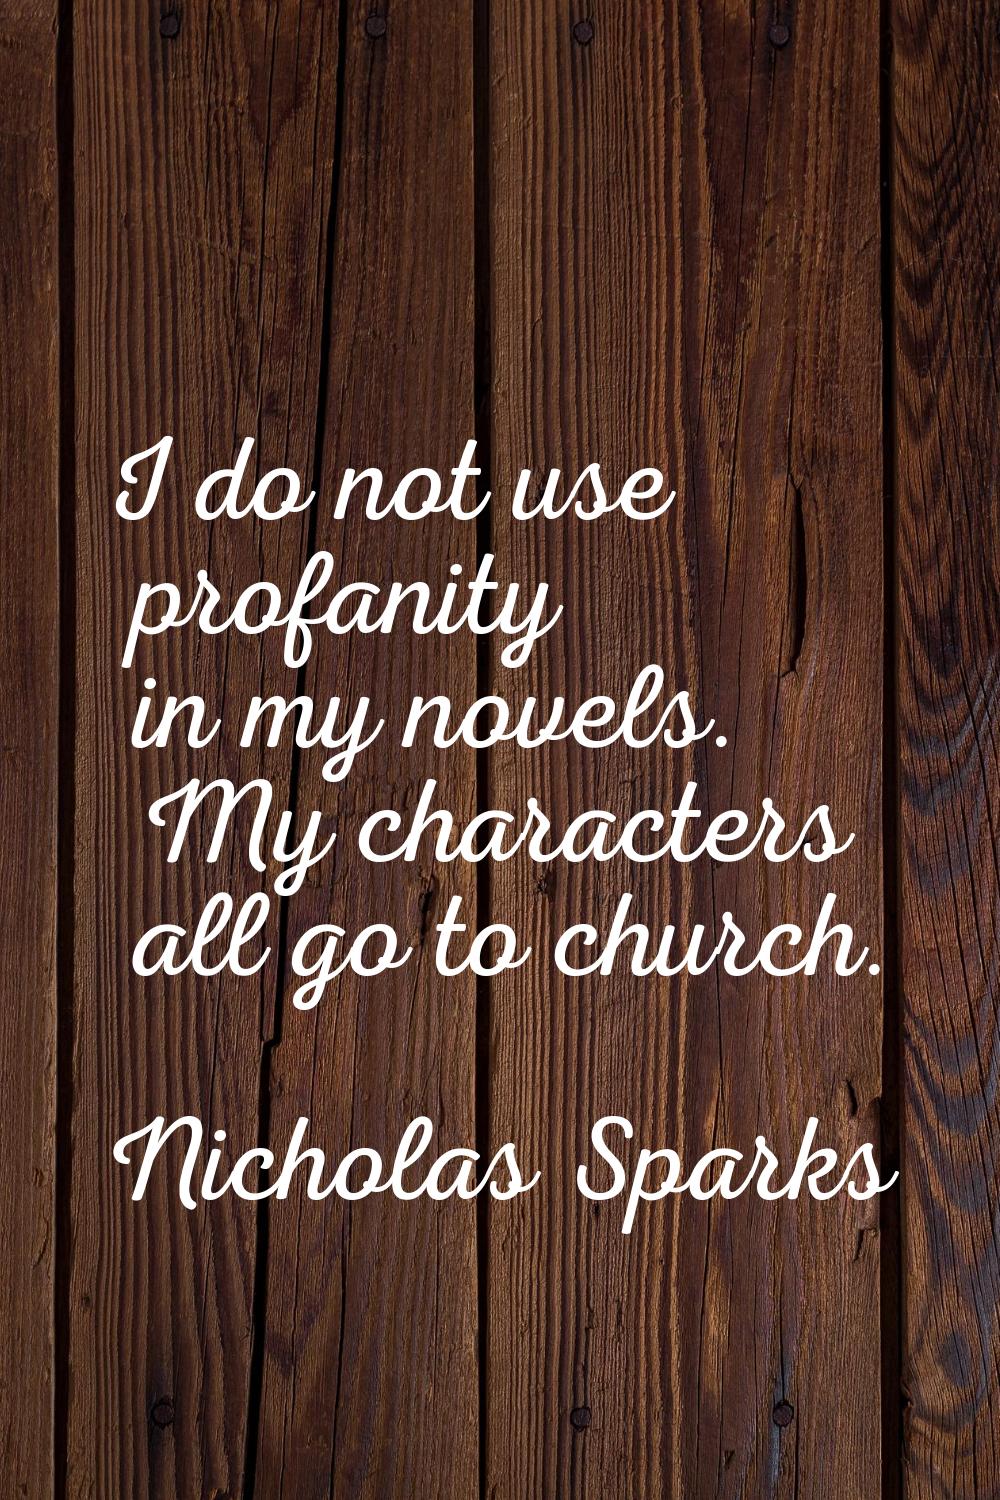 I do not use profanity in my novels. My characters all go to church.